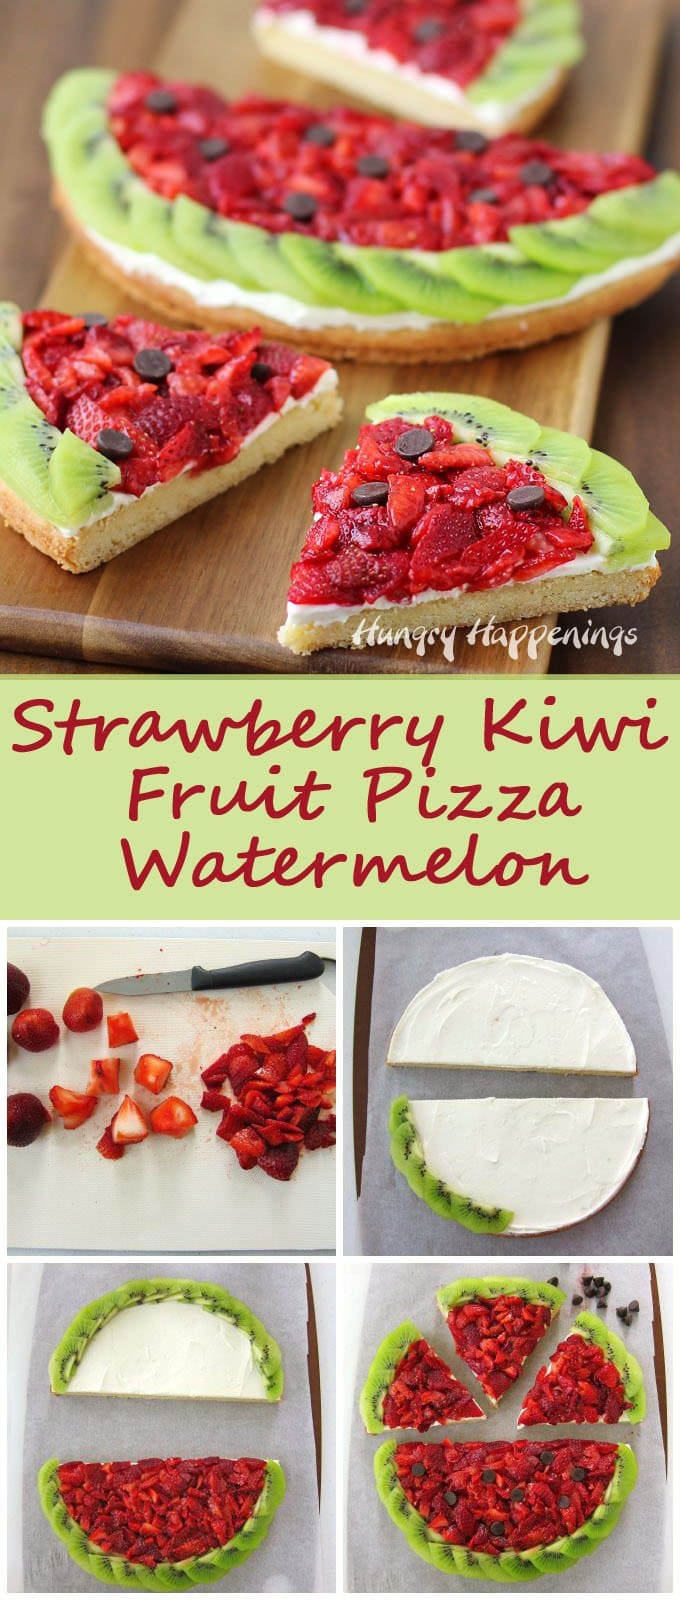 Here’s a fun summer recipe that isn’t exactly as it appears. This Strawberry Kiwi Fruit Pizza looks like a watermelon but tastes like a dessert.